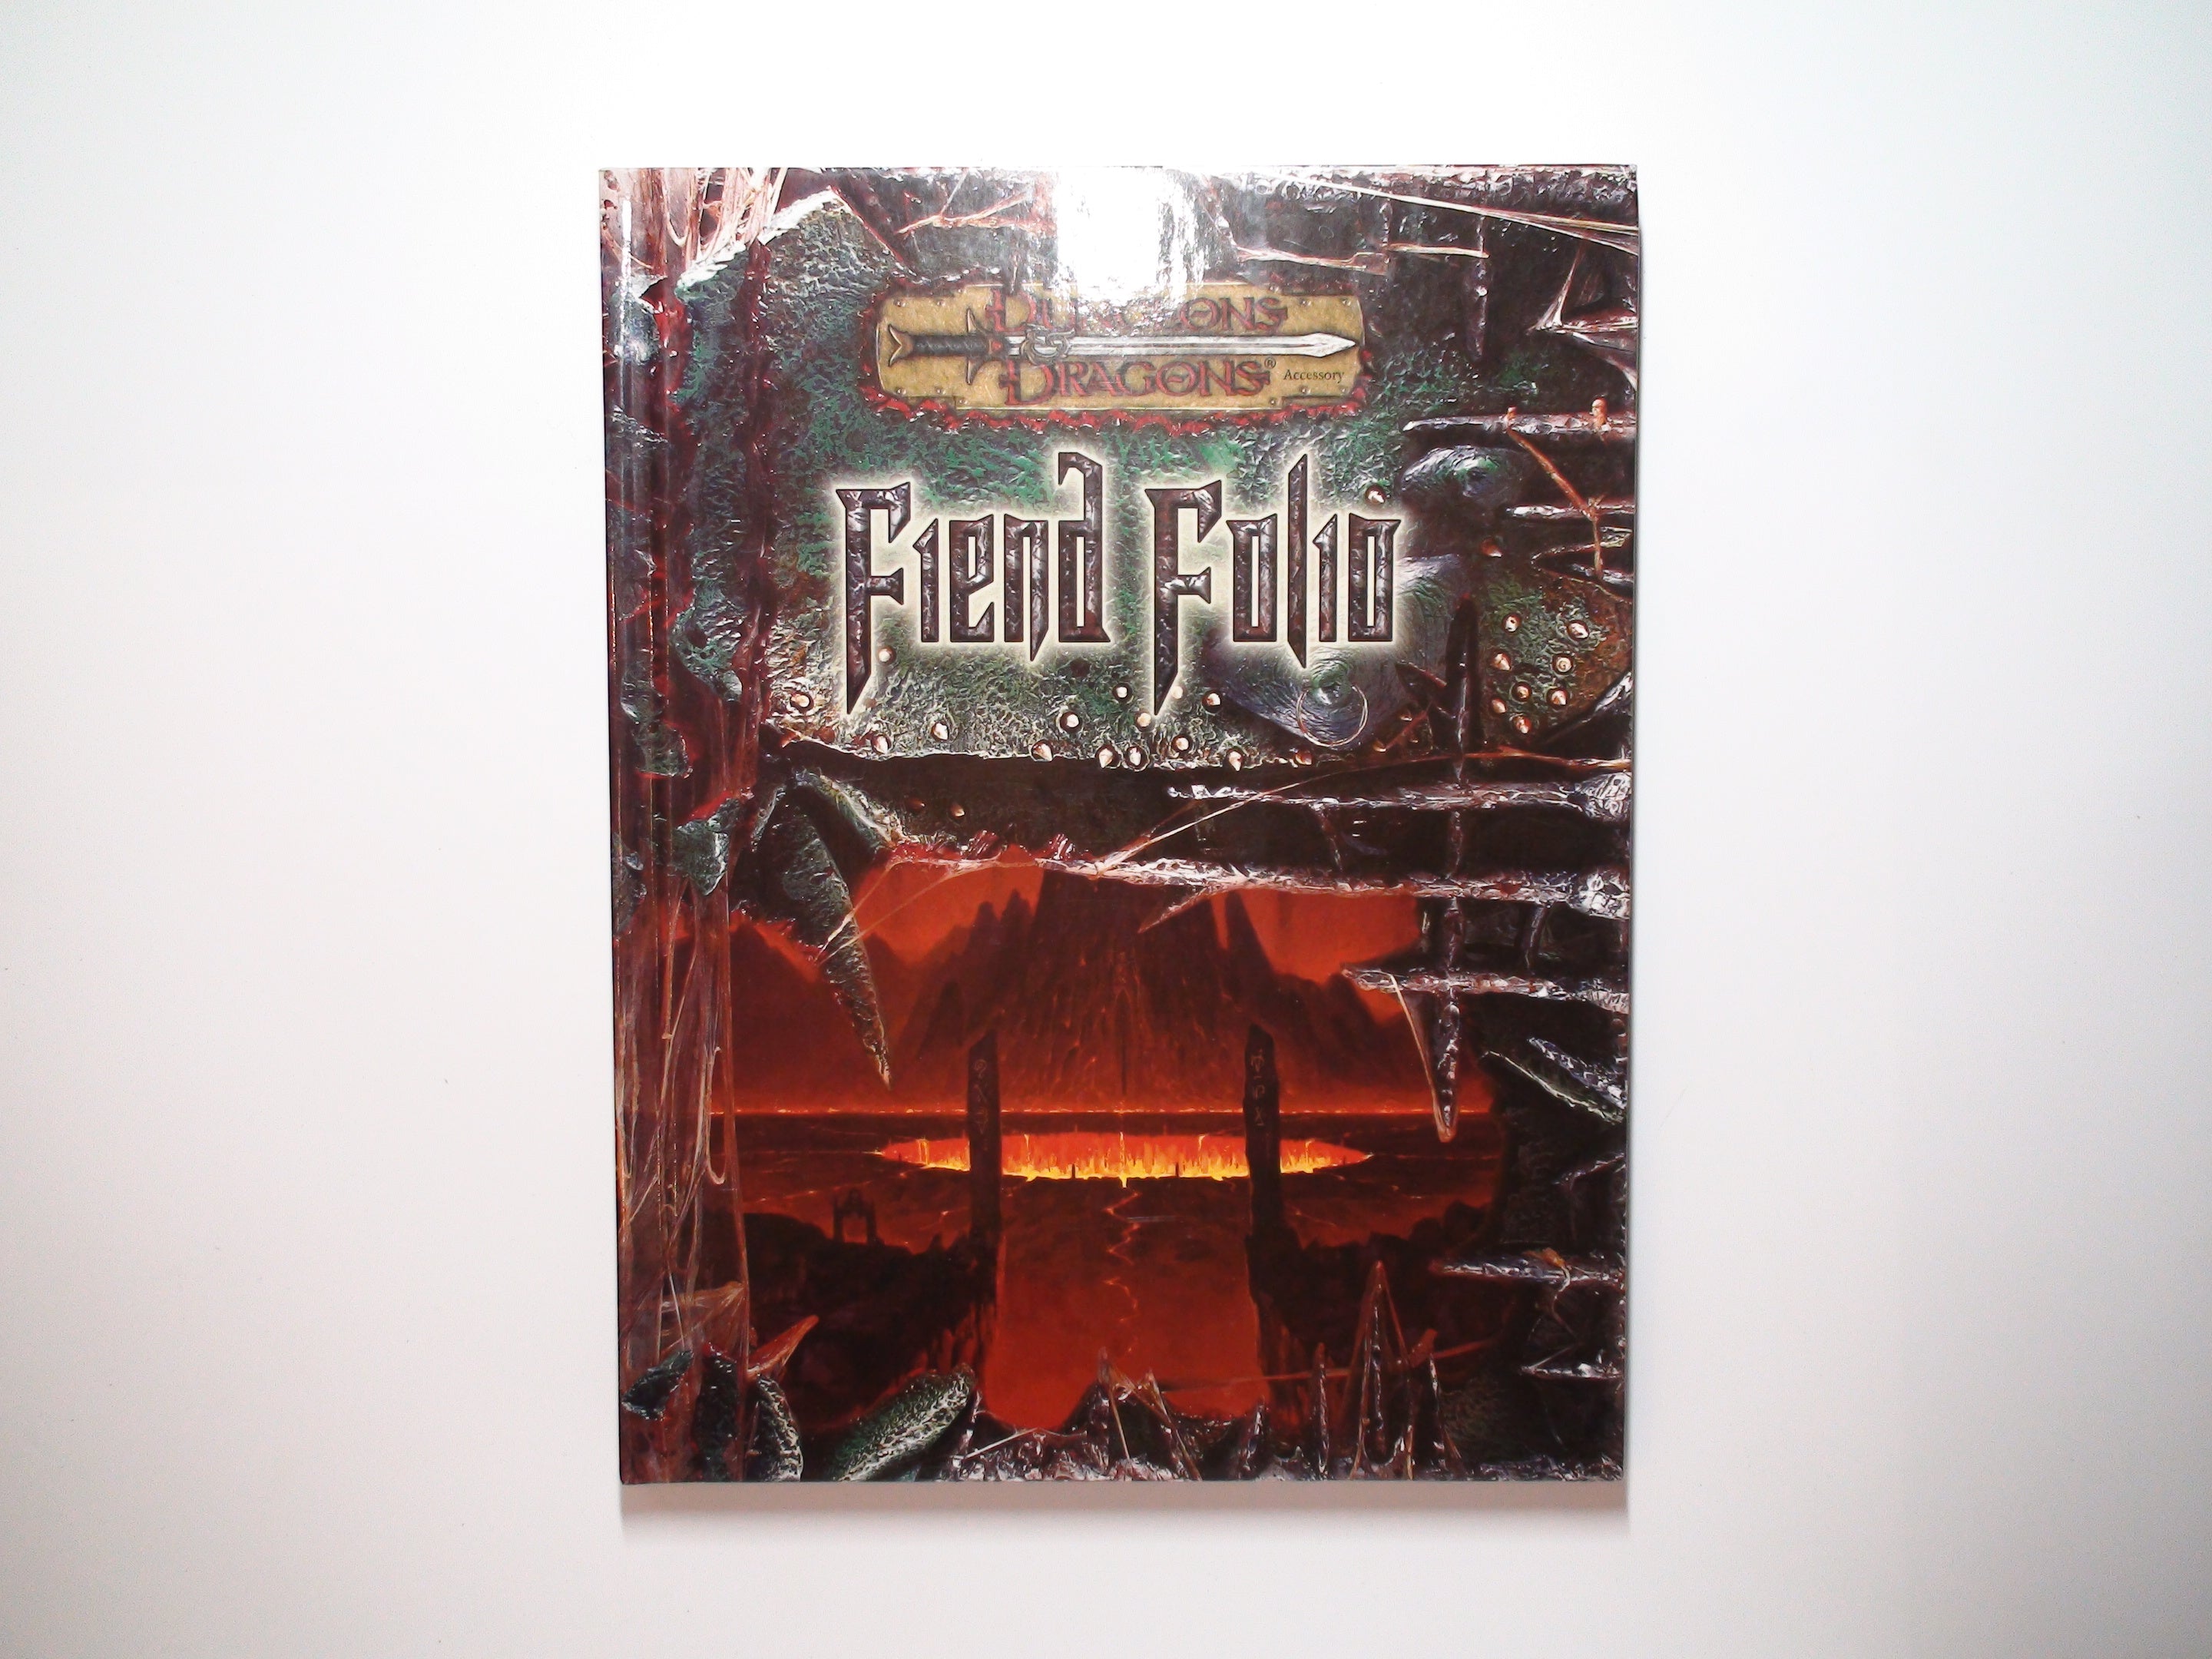 Fiend Folio, Wizzards of the Coast, Dungeons and Dragons 3.5, 1st Printing, 2003